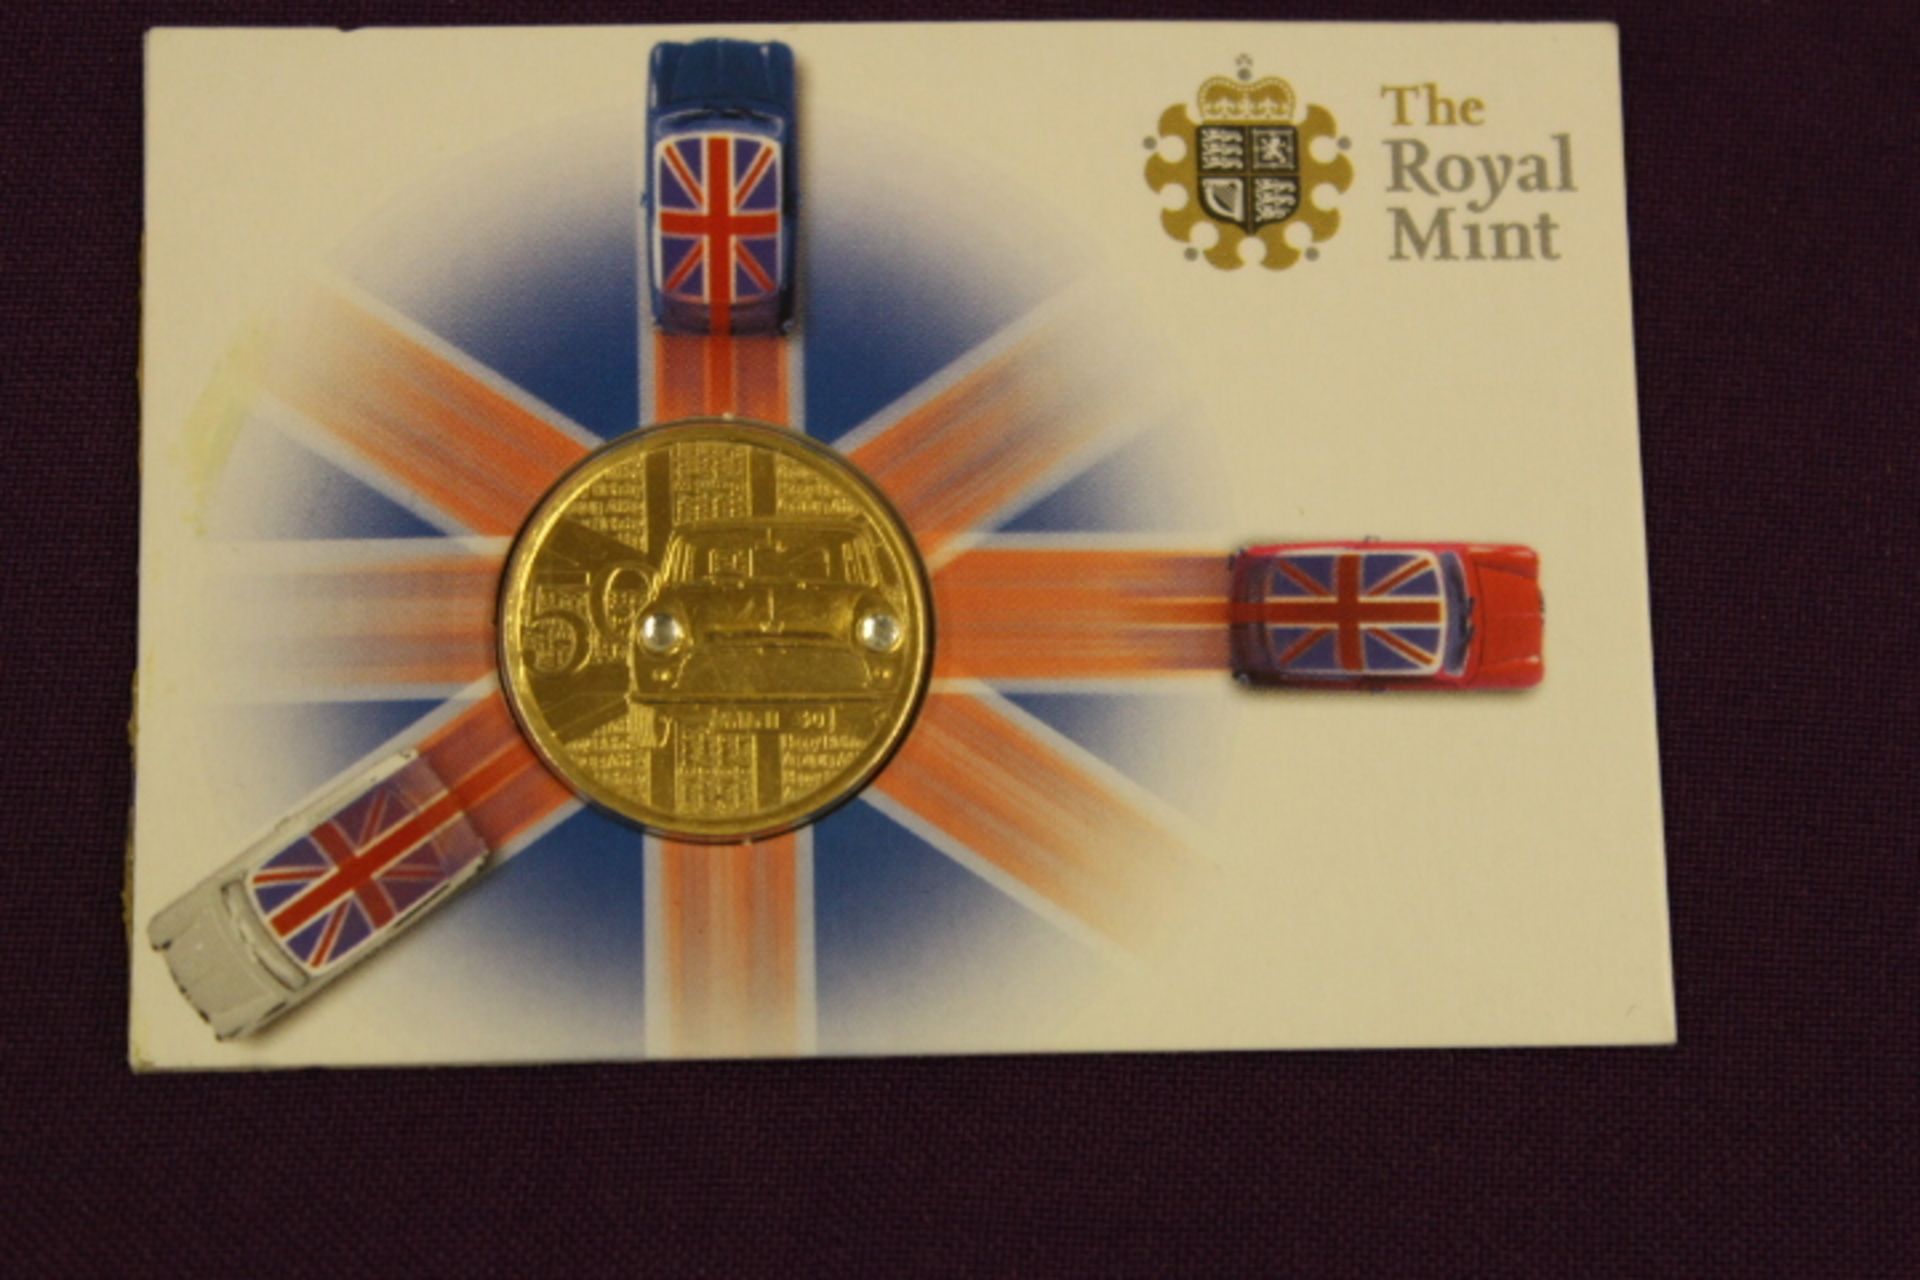 22 Carat Gold Plated 50 Years Commemorative Royal Mint With Crystal Head Lights - Image 2 of 2